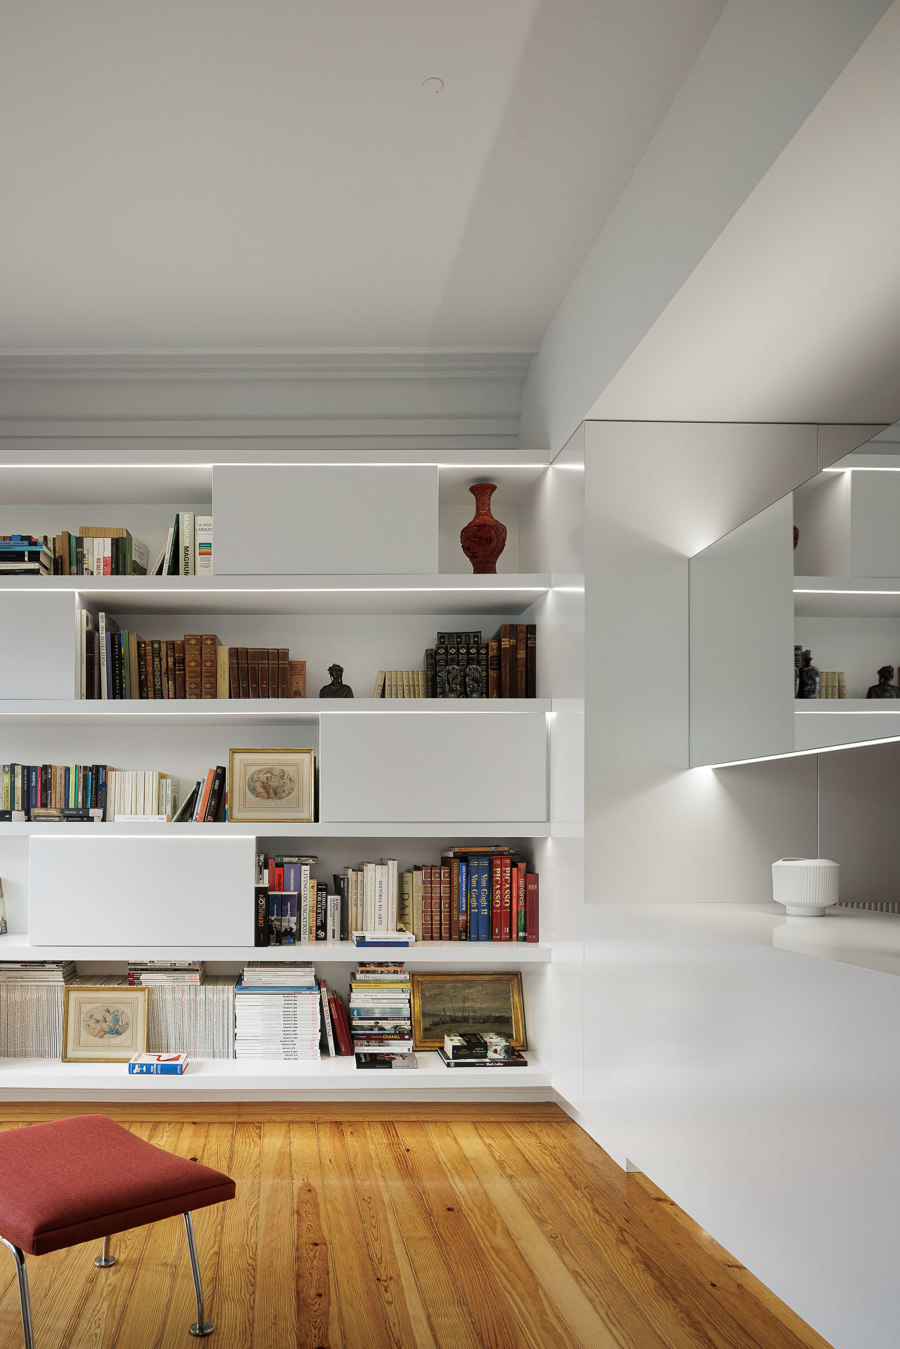 AN Apartment by Nuno Miguel Dias Arquitecto | Living space